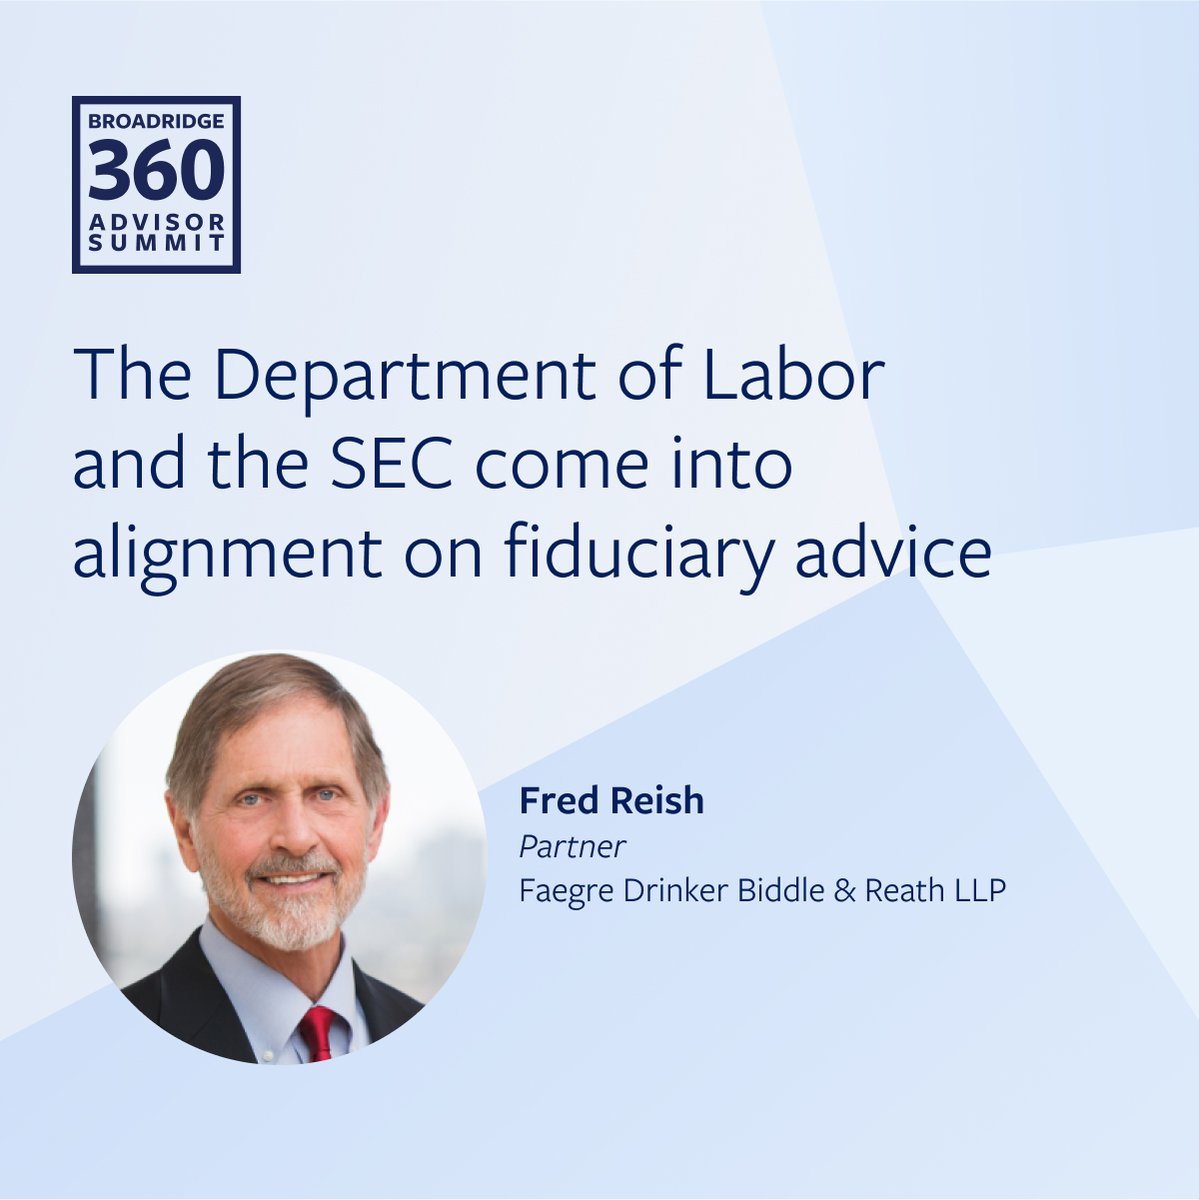 Don’t miss Fred Reish discussing what the recent alignment of the Department of Labor & the Securities & Exchange Commission’s views on Fiduciary Advice means for your practice. events.broadridge.com/event/2785a37e… #BR360AdvisorSummit #AssetManagementInsights #WealthManagement